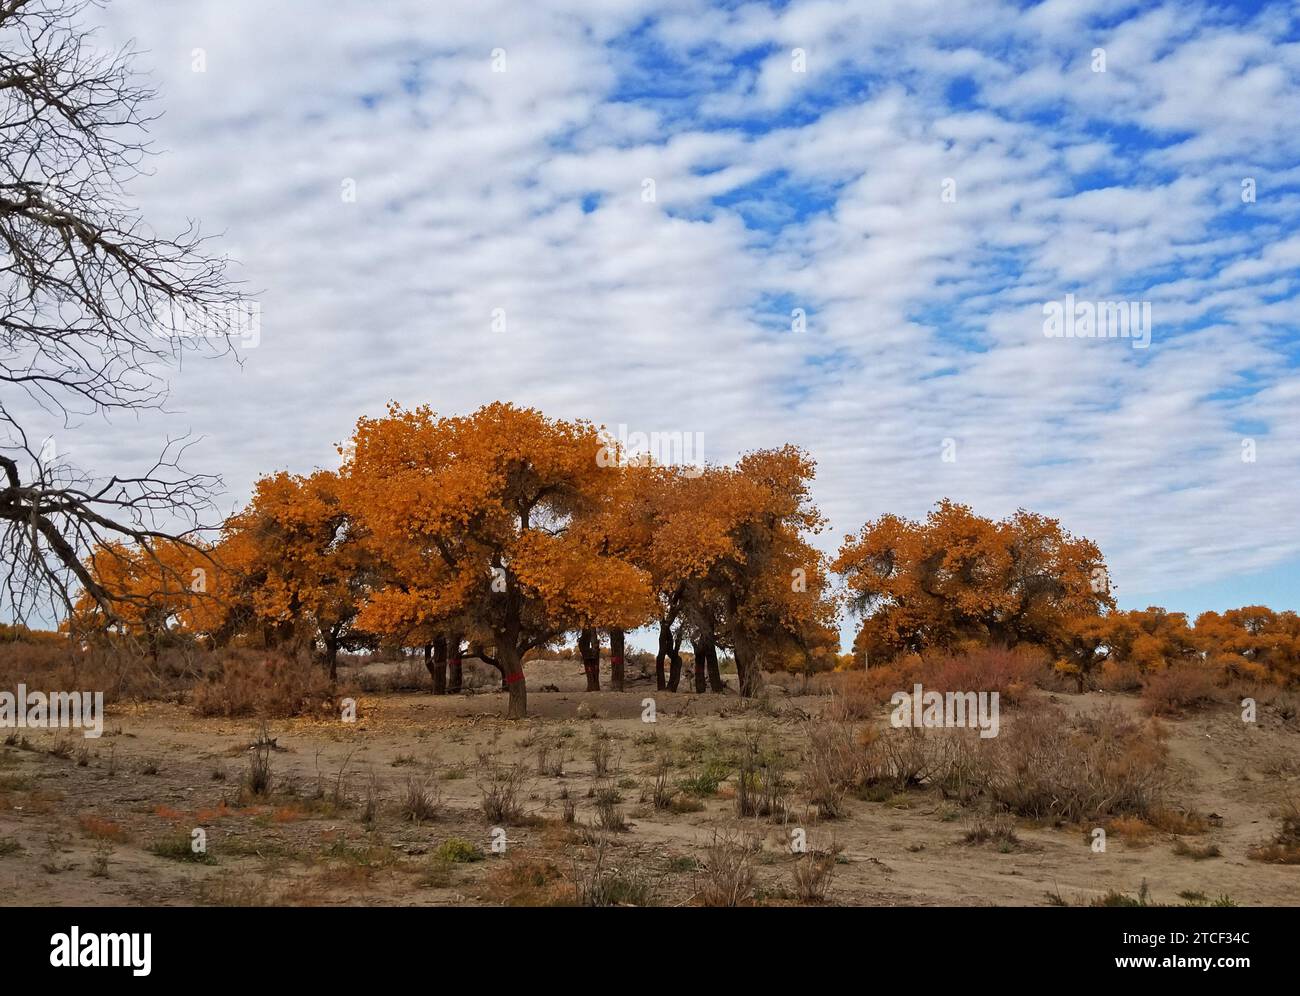 Populus euphratica or desert poplar trees, and their brilliant autumn foliage colors, provide many scenic views in an Inner Mongolia desert oasis unde Stock Photo